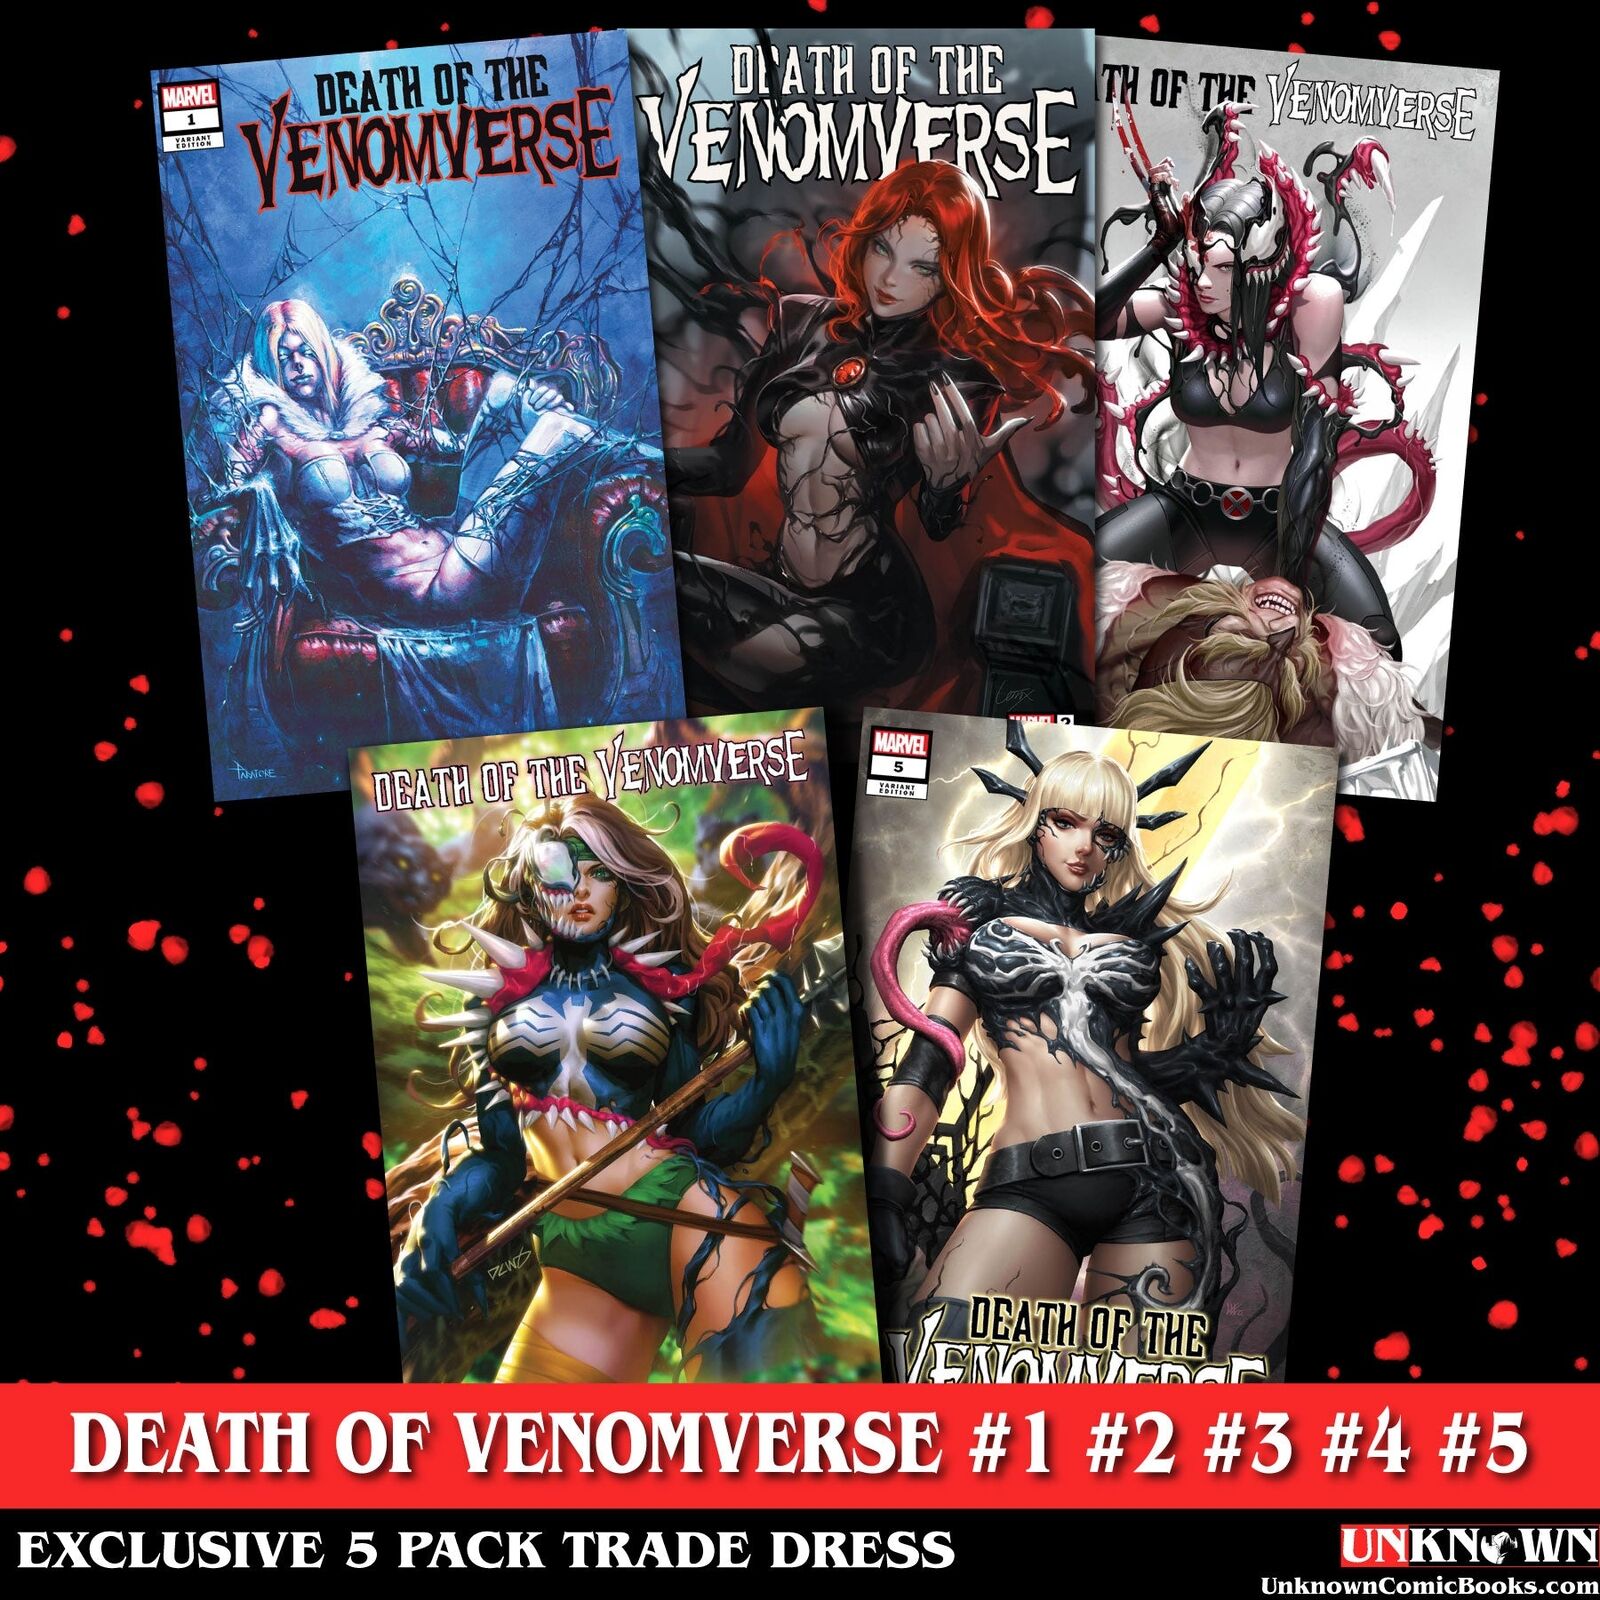 [5 PACK TRADE] DEATH OF THE VENOMVERSE #1, #2, #3, #4, #5 UNKNOWN COMICS EXCLUSI